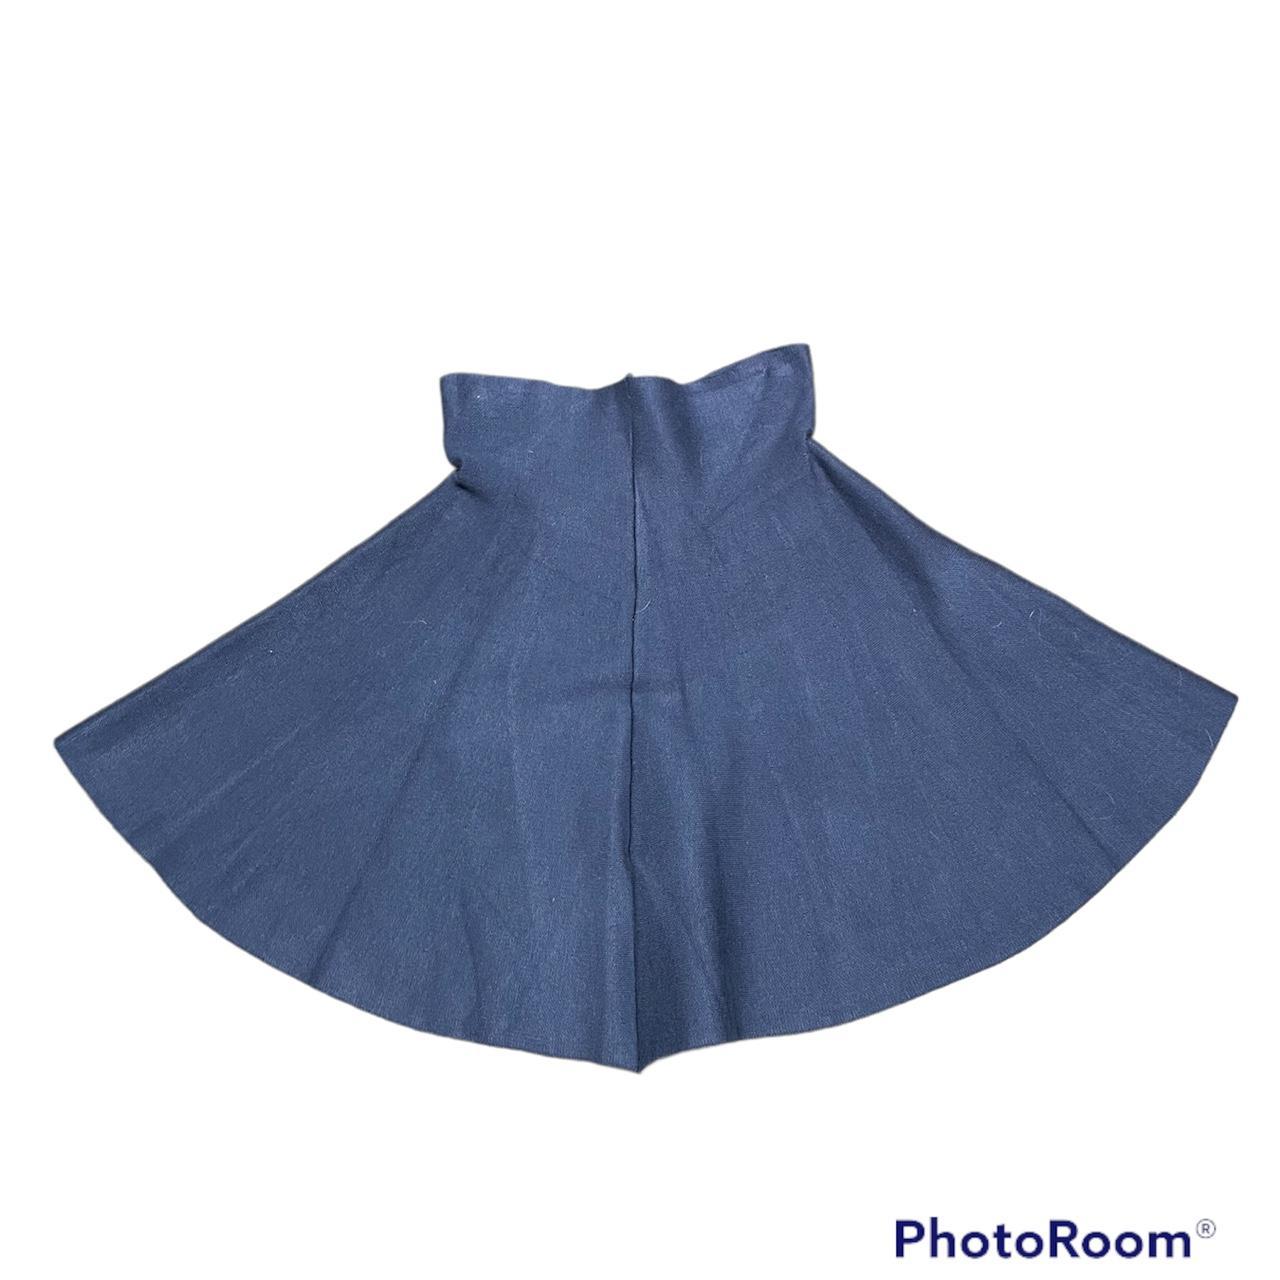 Product Image 2 - Navy blue circle skirt 
Stretchy